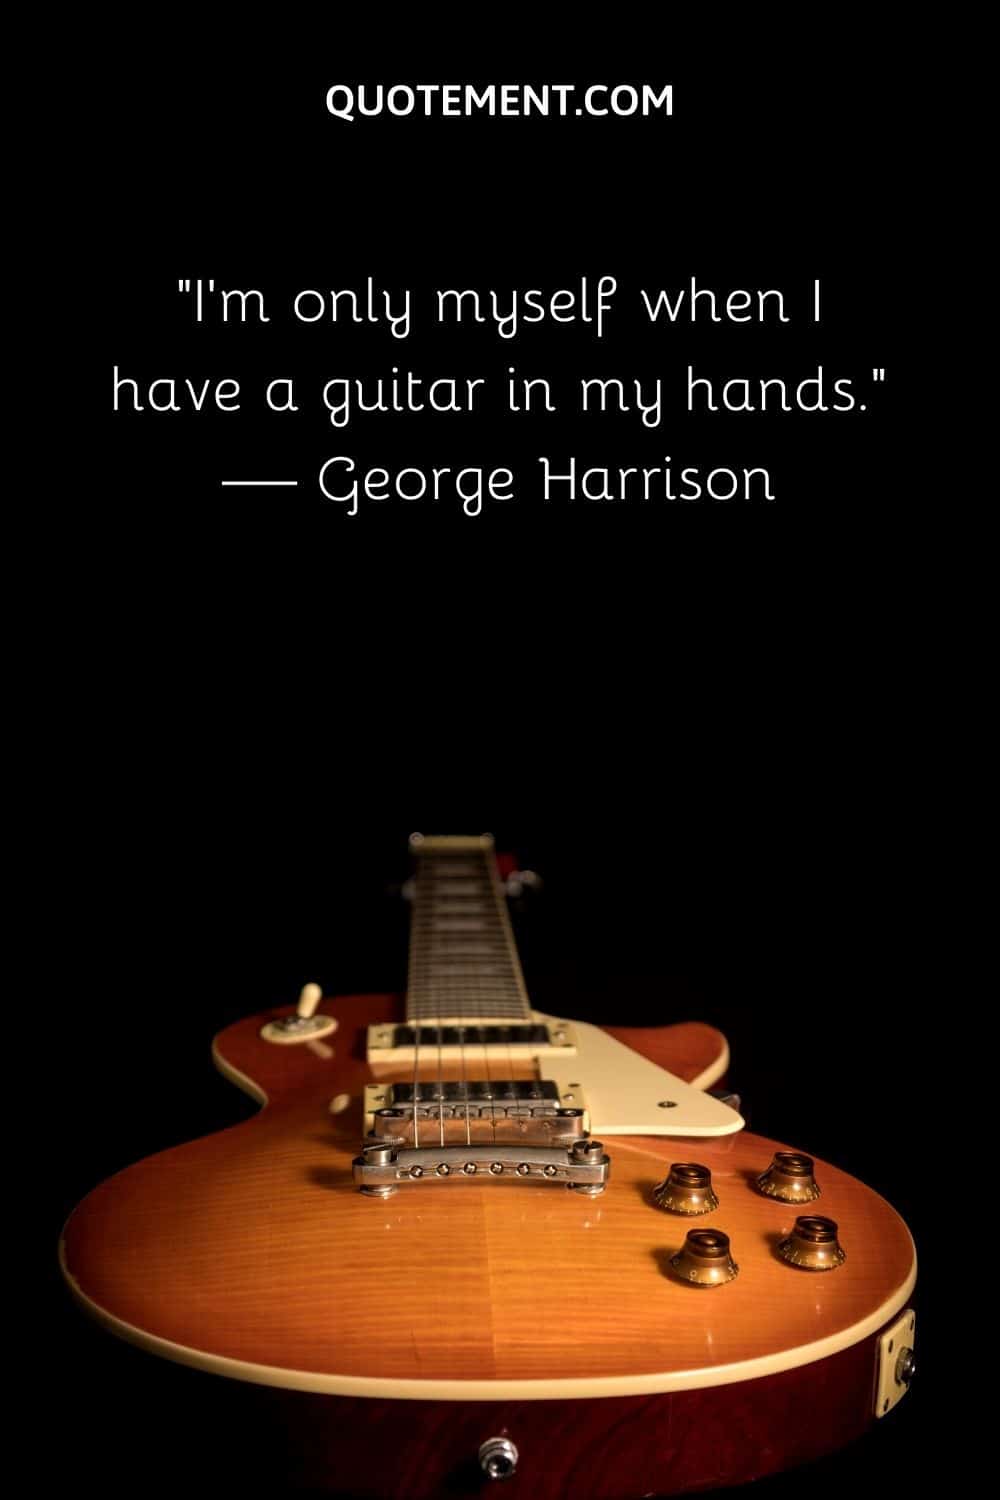 I'm only myself when I have a guitar in my hands